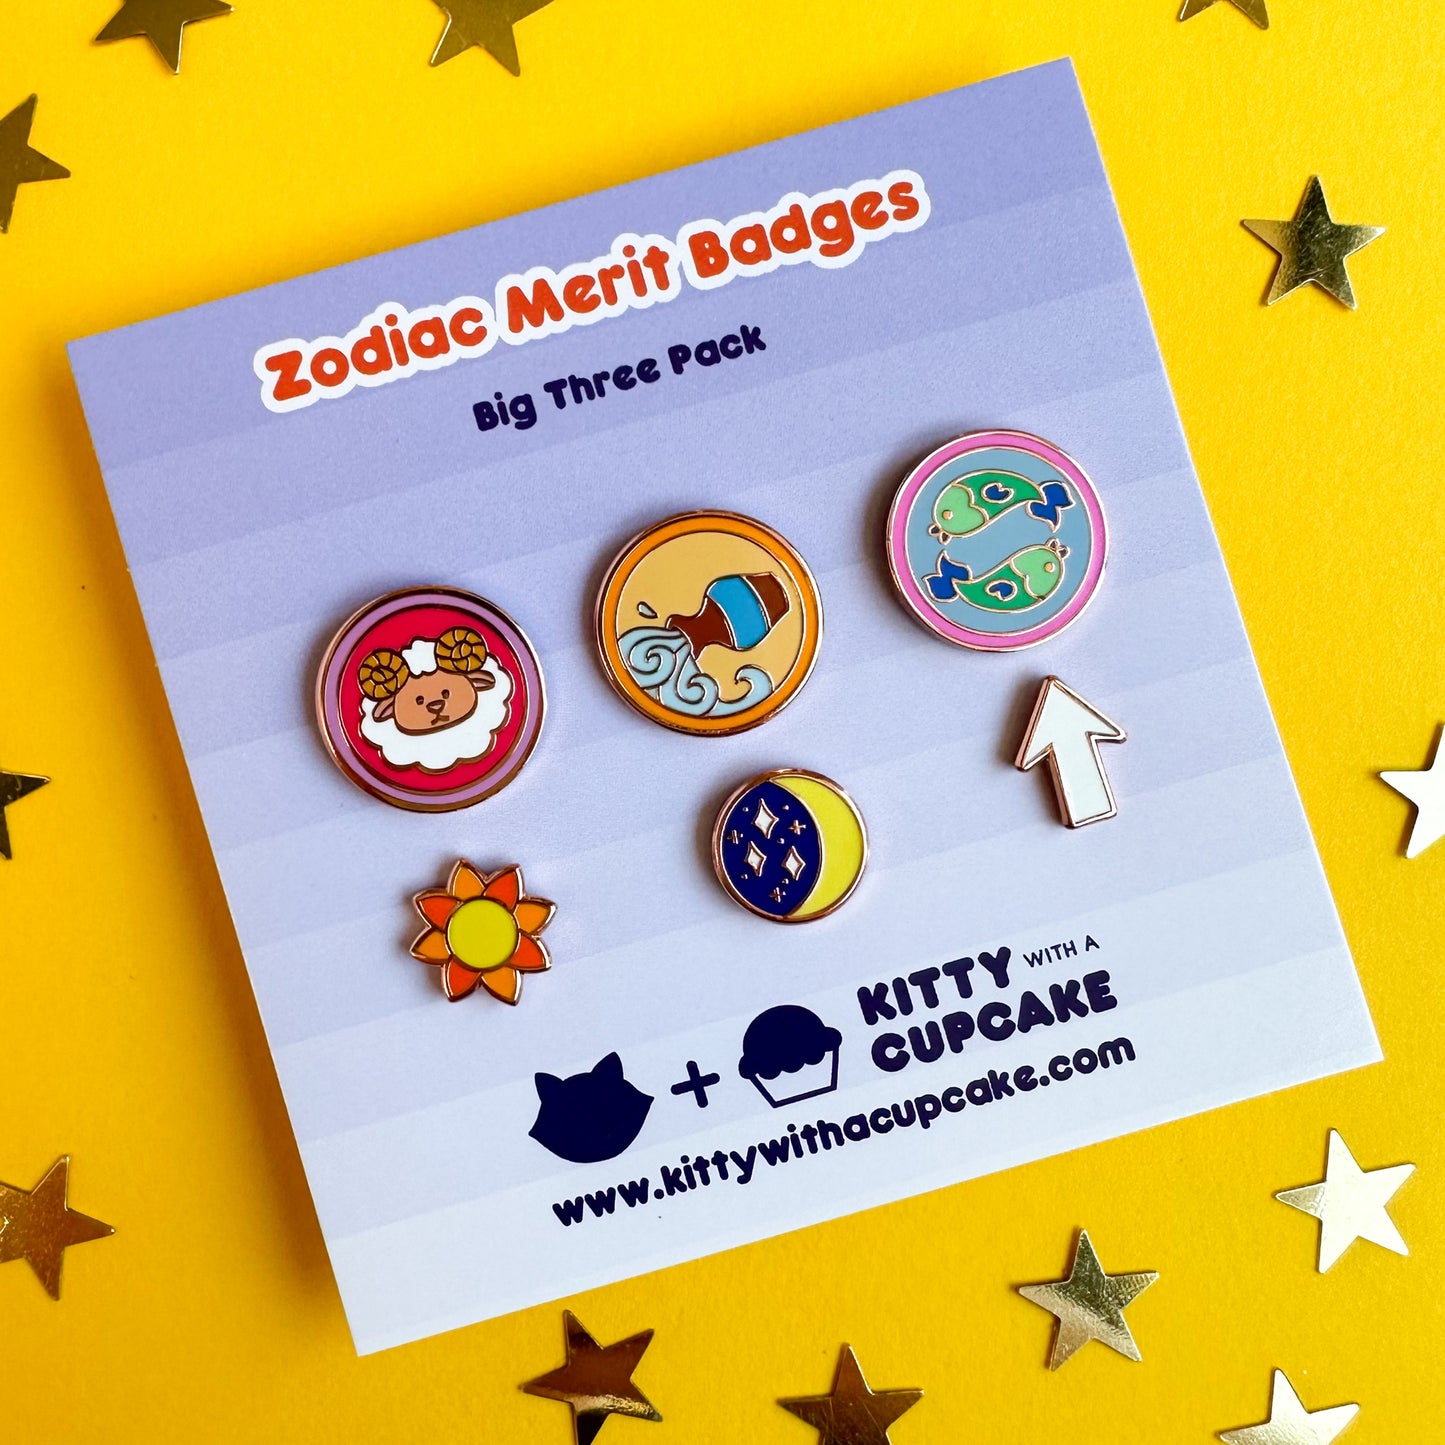 A set of six enamel pins, three are circles with cute illustrations representing zodiac signs. and the other three are shaped like a sun, moon, and rising arrow.  The pins are packaged on a card that reads "Zodiac Merit Badges"